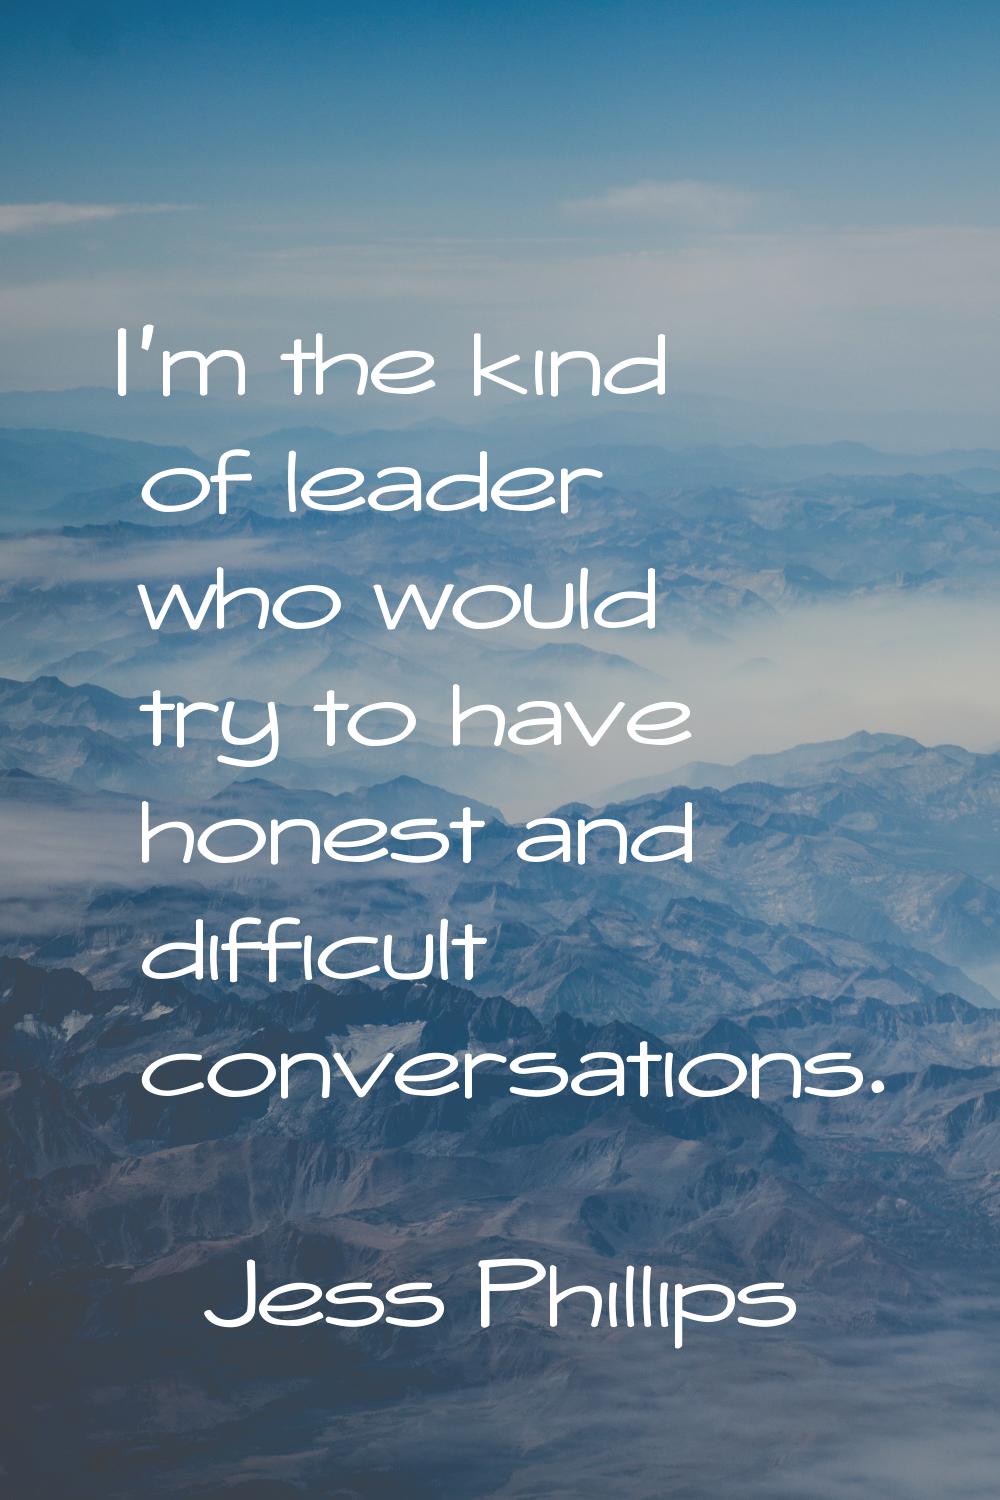 I'm the kind of leader who would try to have honest and difficult conversations.